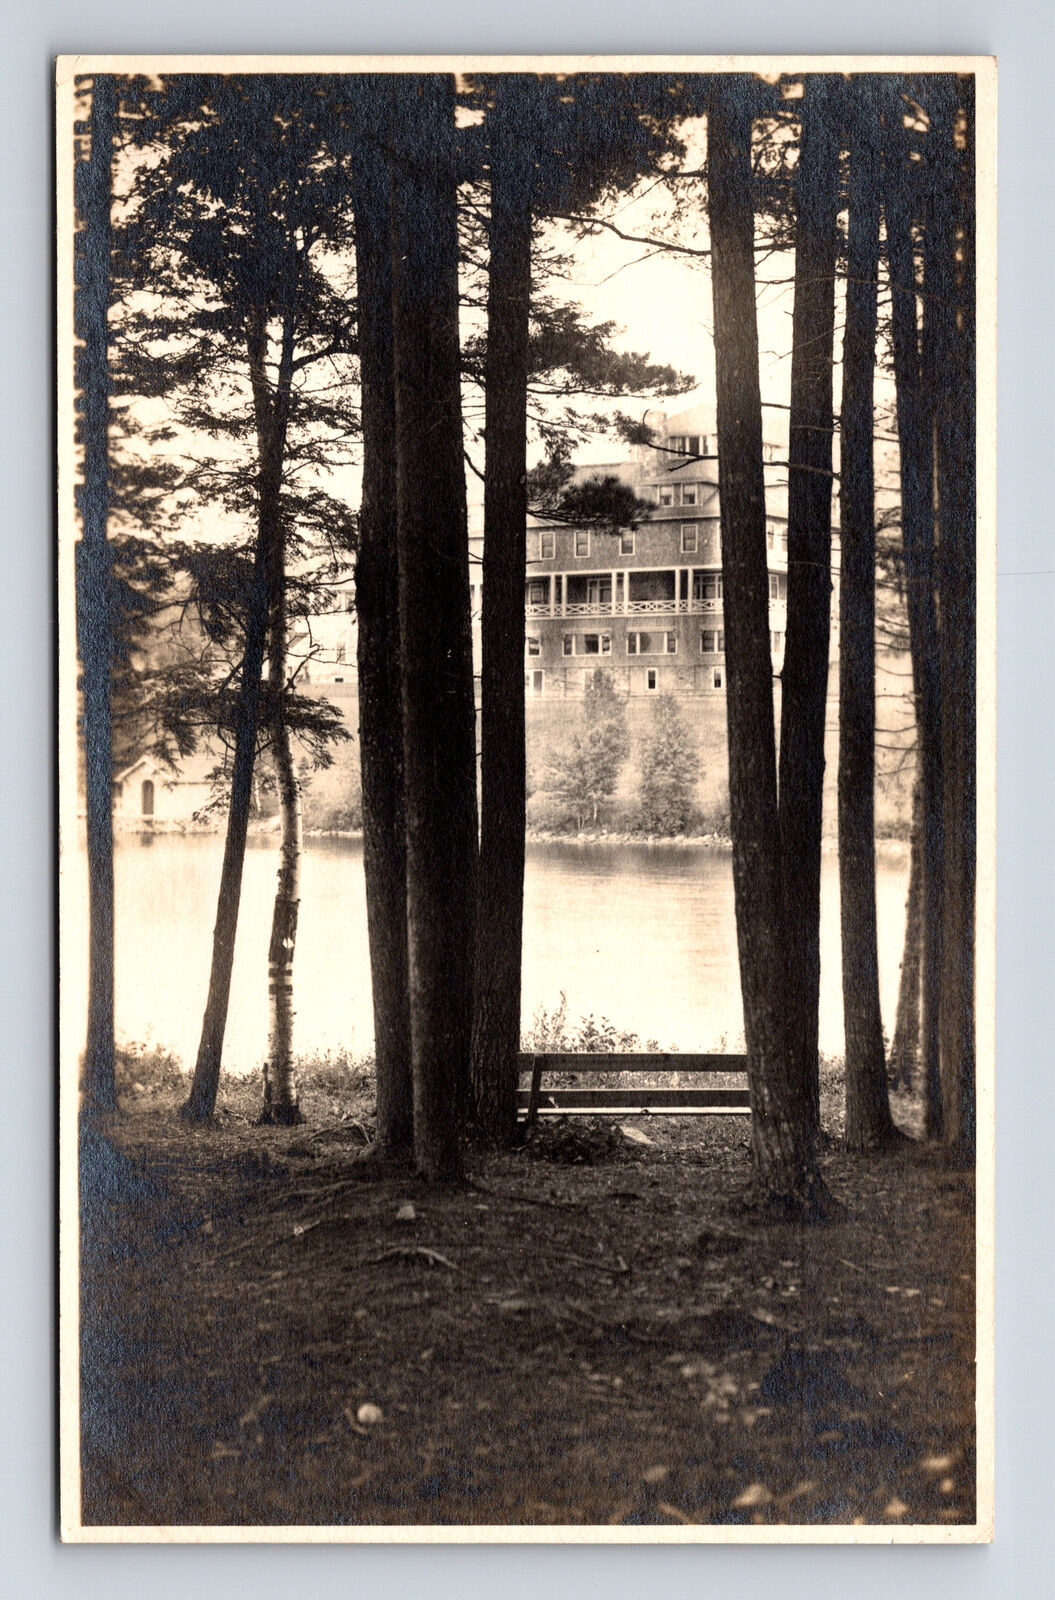 RPPC Scenic Riverside Park View Large Unknown Hotel Possibly ME or NH Postcard